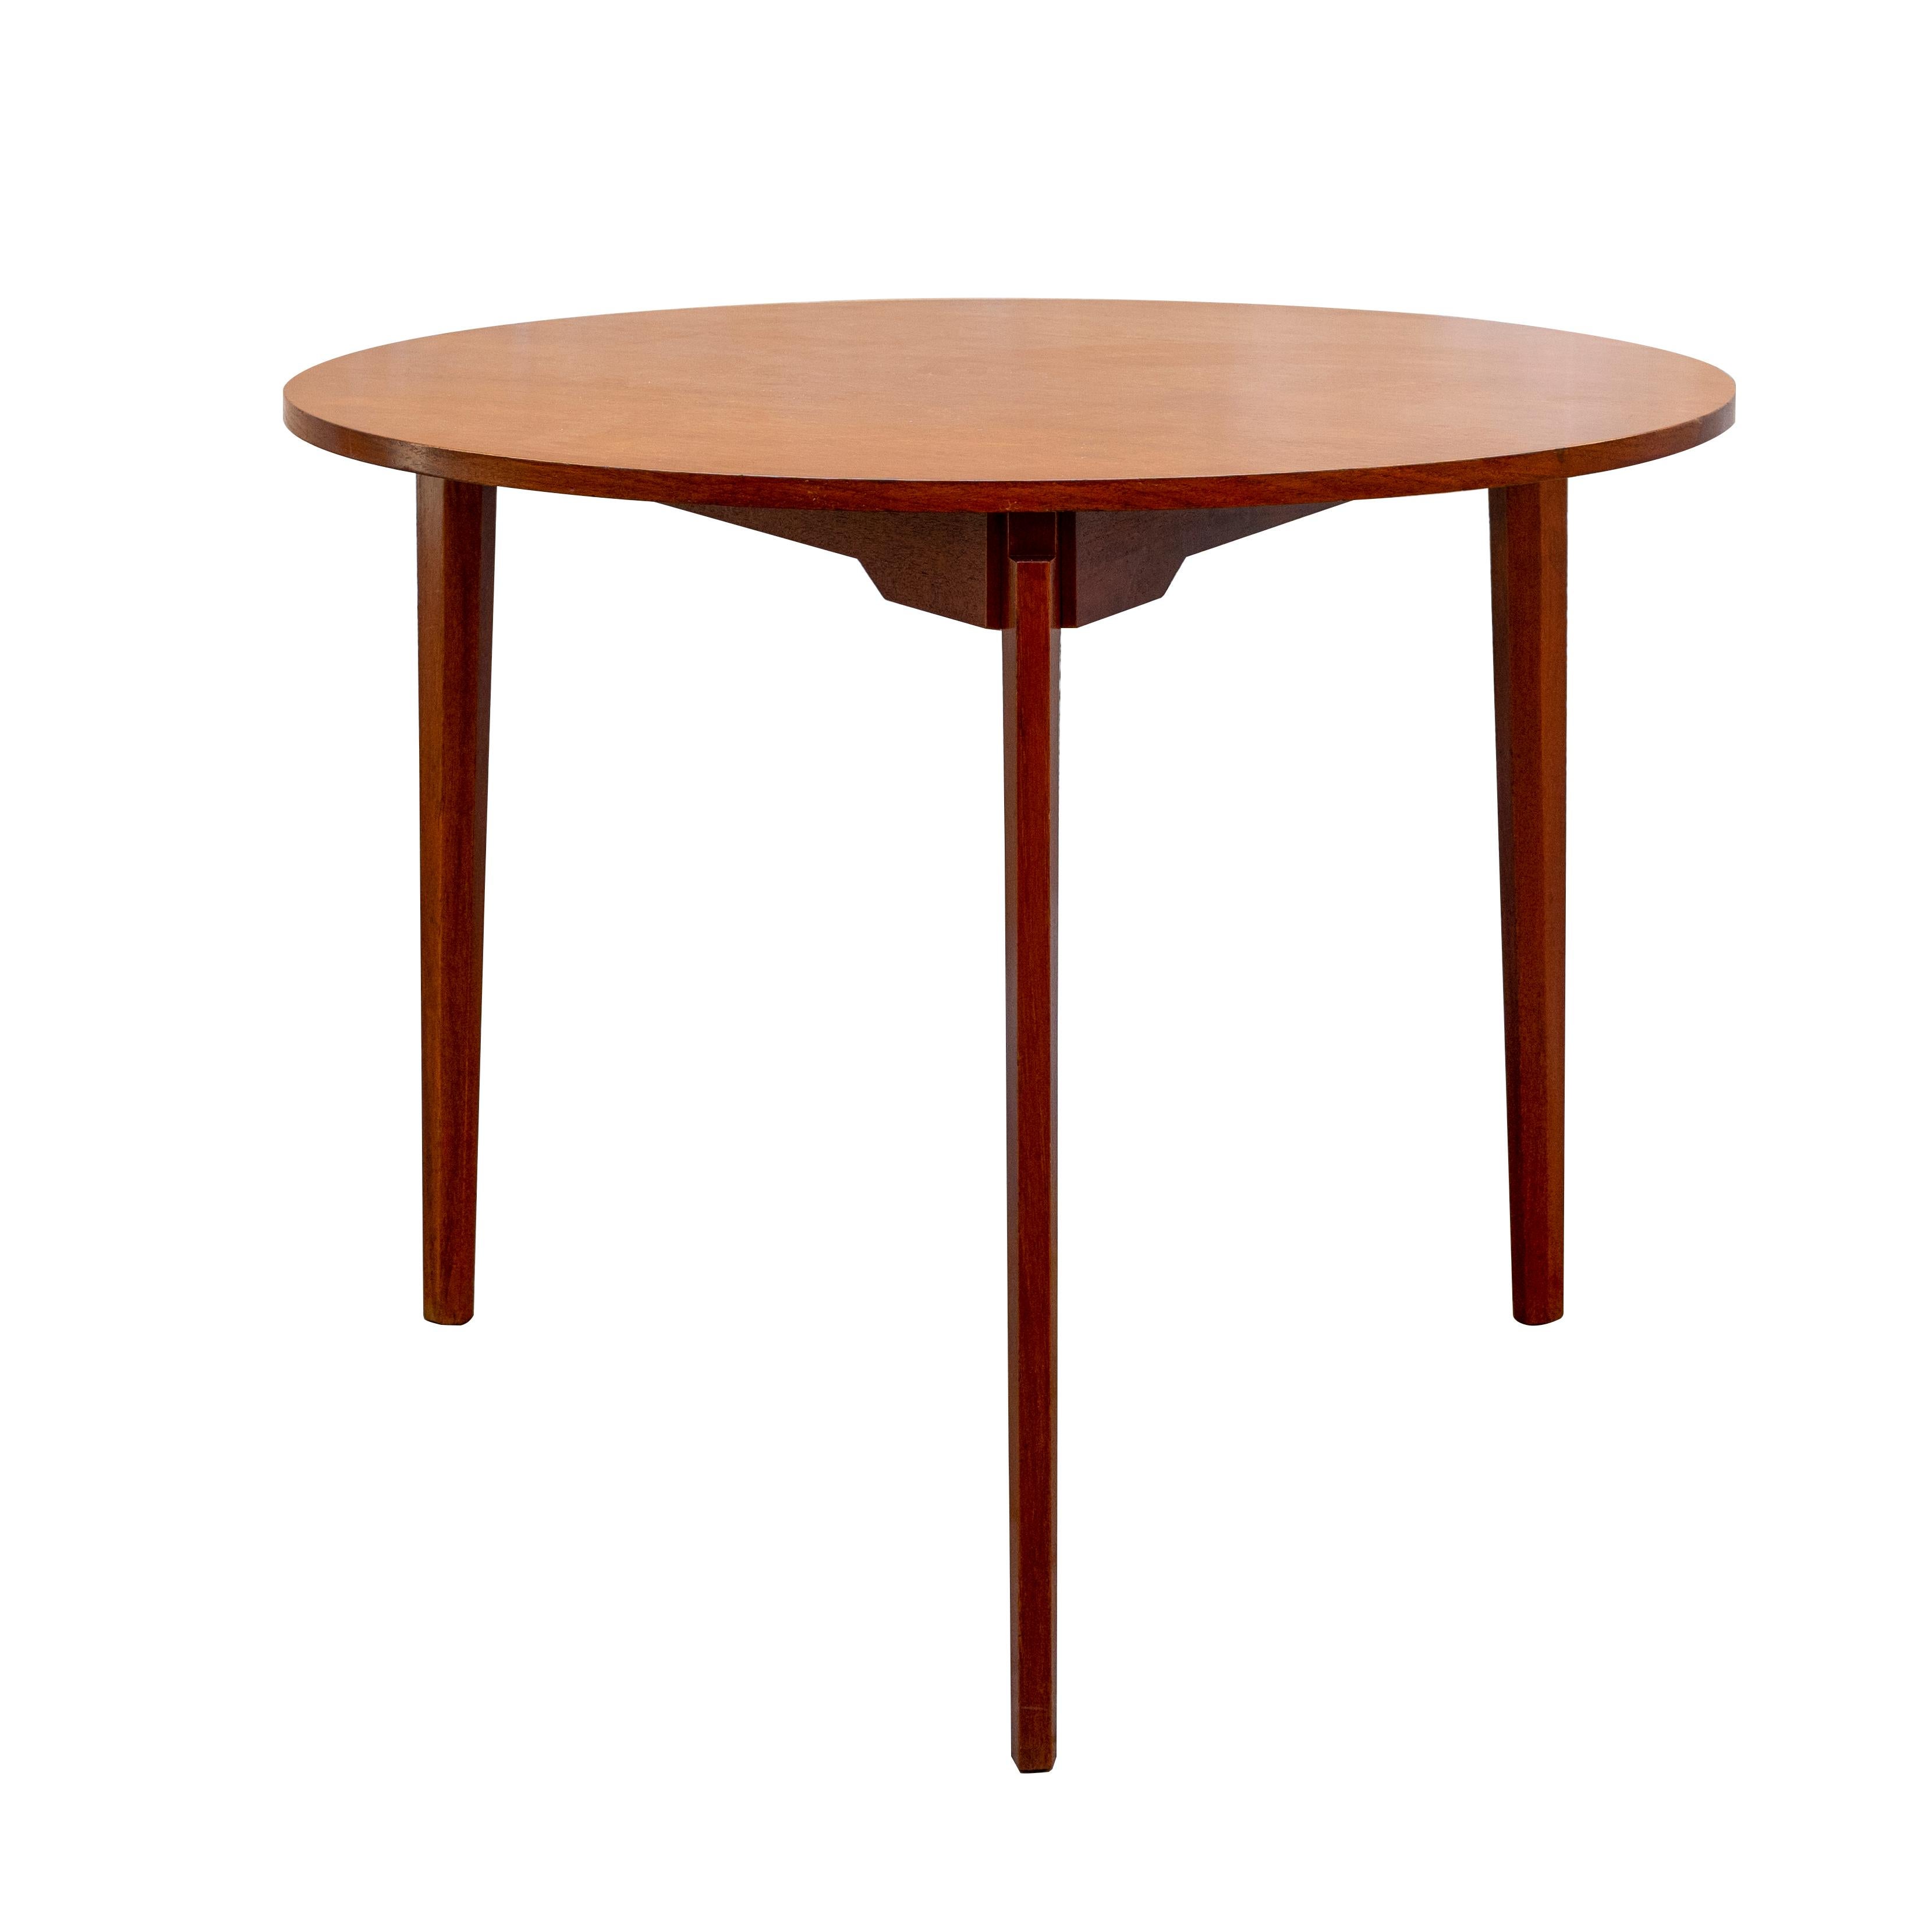 Gio Ponti style round table with three legs Italy Mid-Century Modern.
The round table in the style of Gio Ponti, the design with only three legs is great the motif that is created in the space between the top and the stems, which are inserted and